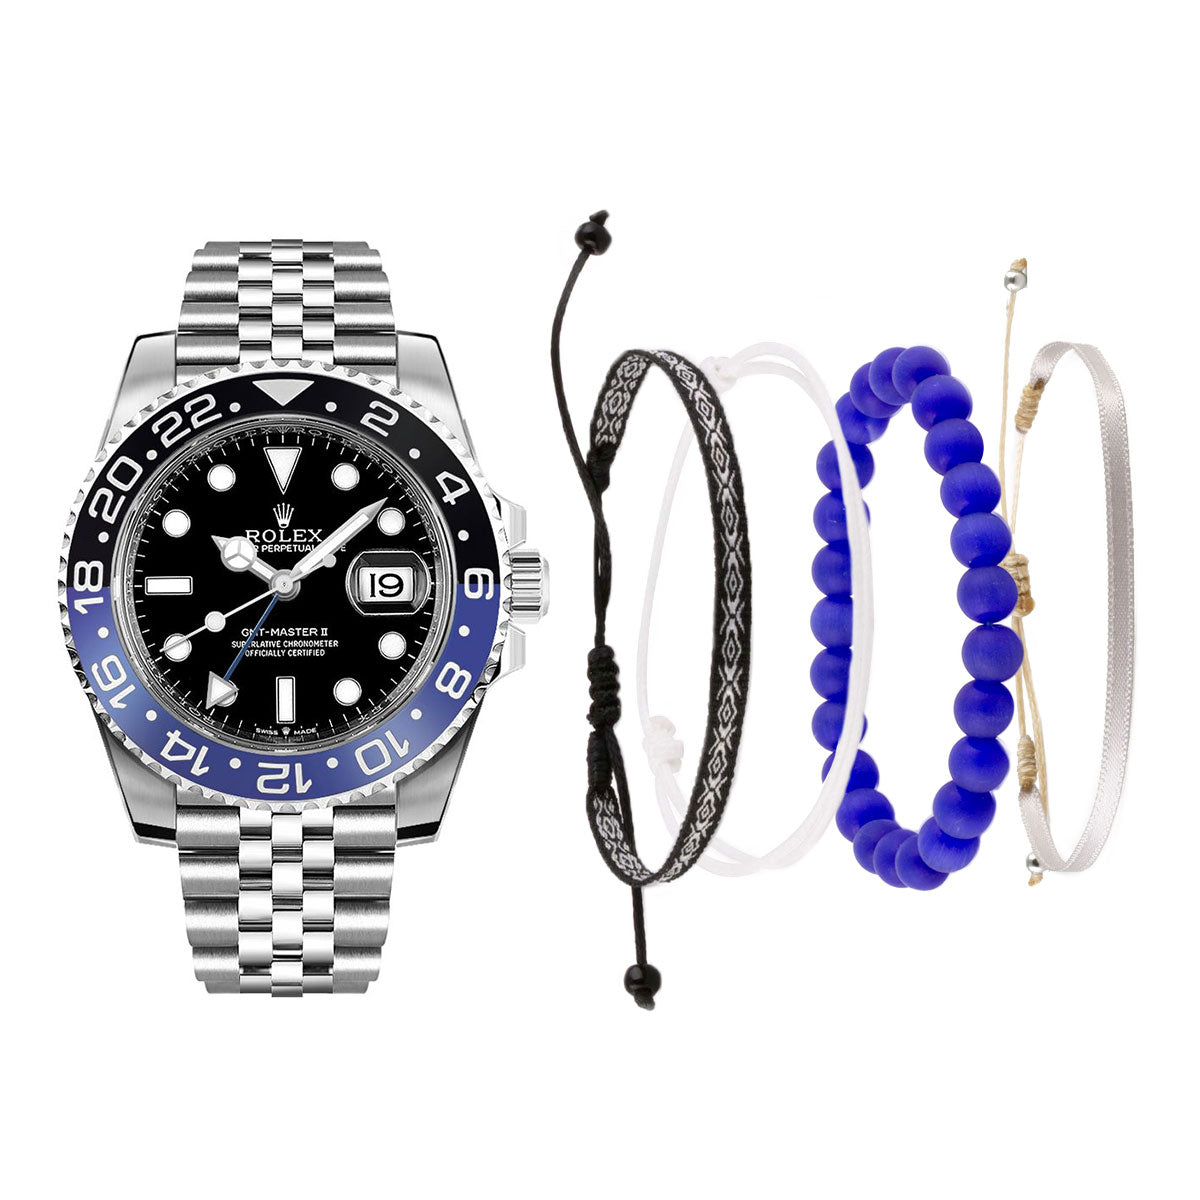 Mixed straps pack - "Rolex Models" special edition